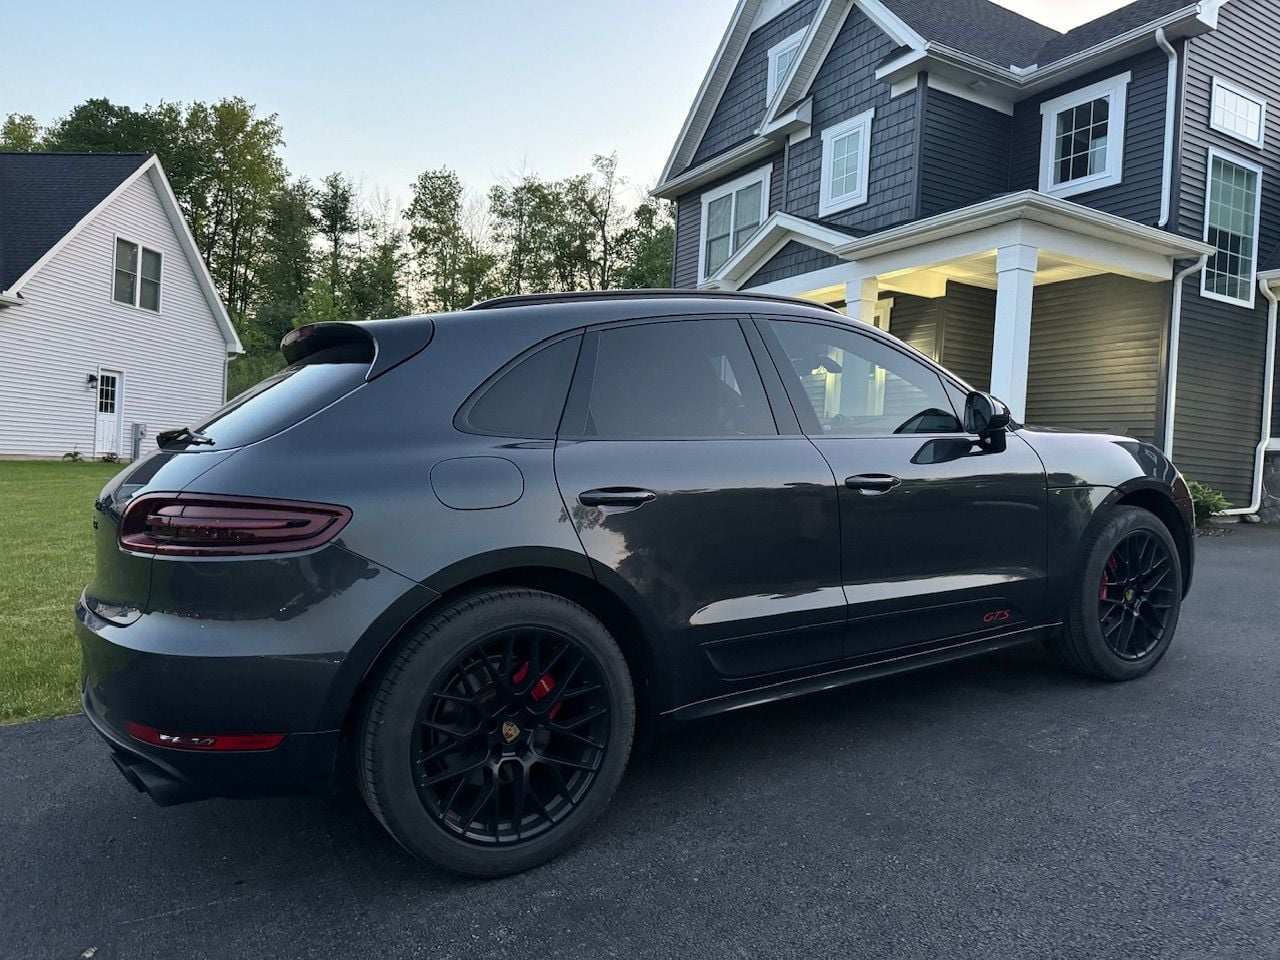 2018 Porsche Macan - 2018 Porsche Macan GTS - Used - VIN WP1AG2A50JLB64983 - 44,682 Miles - 6 cyl - AWD - Automatic - SUV - Gray - Macedon, NY 14502, United States